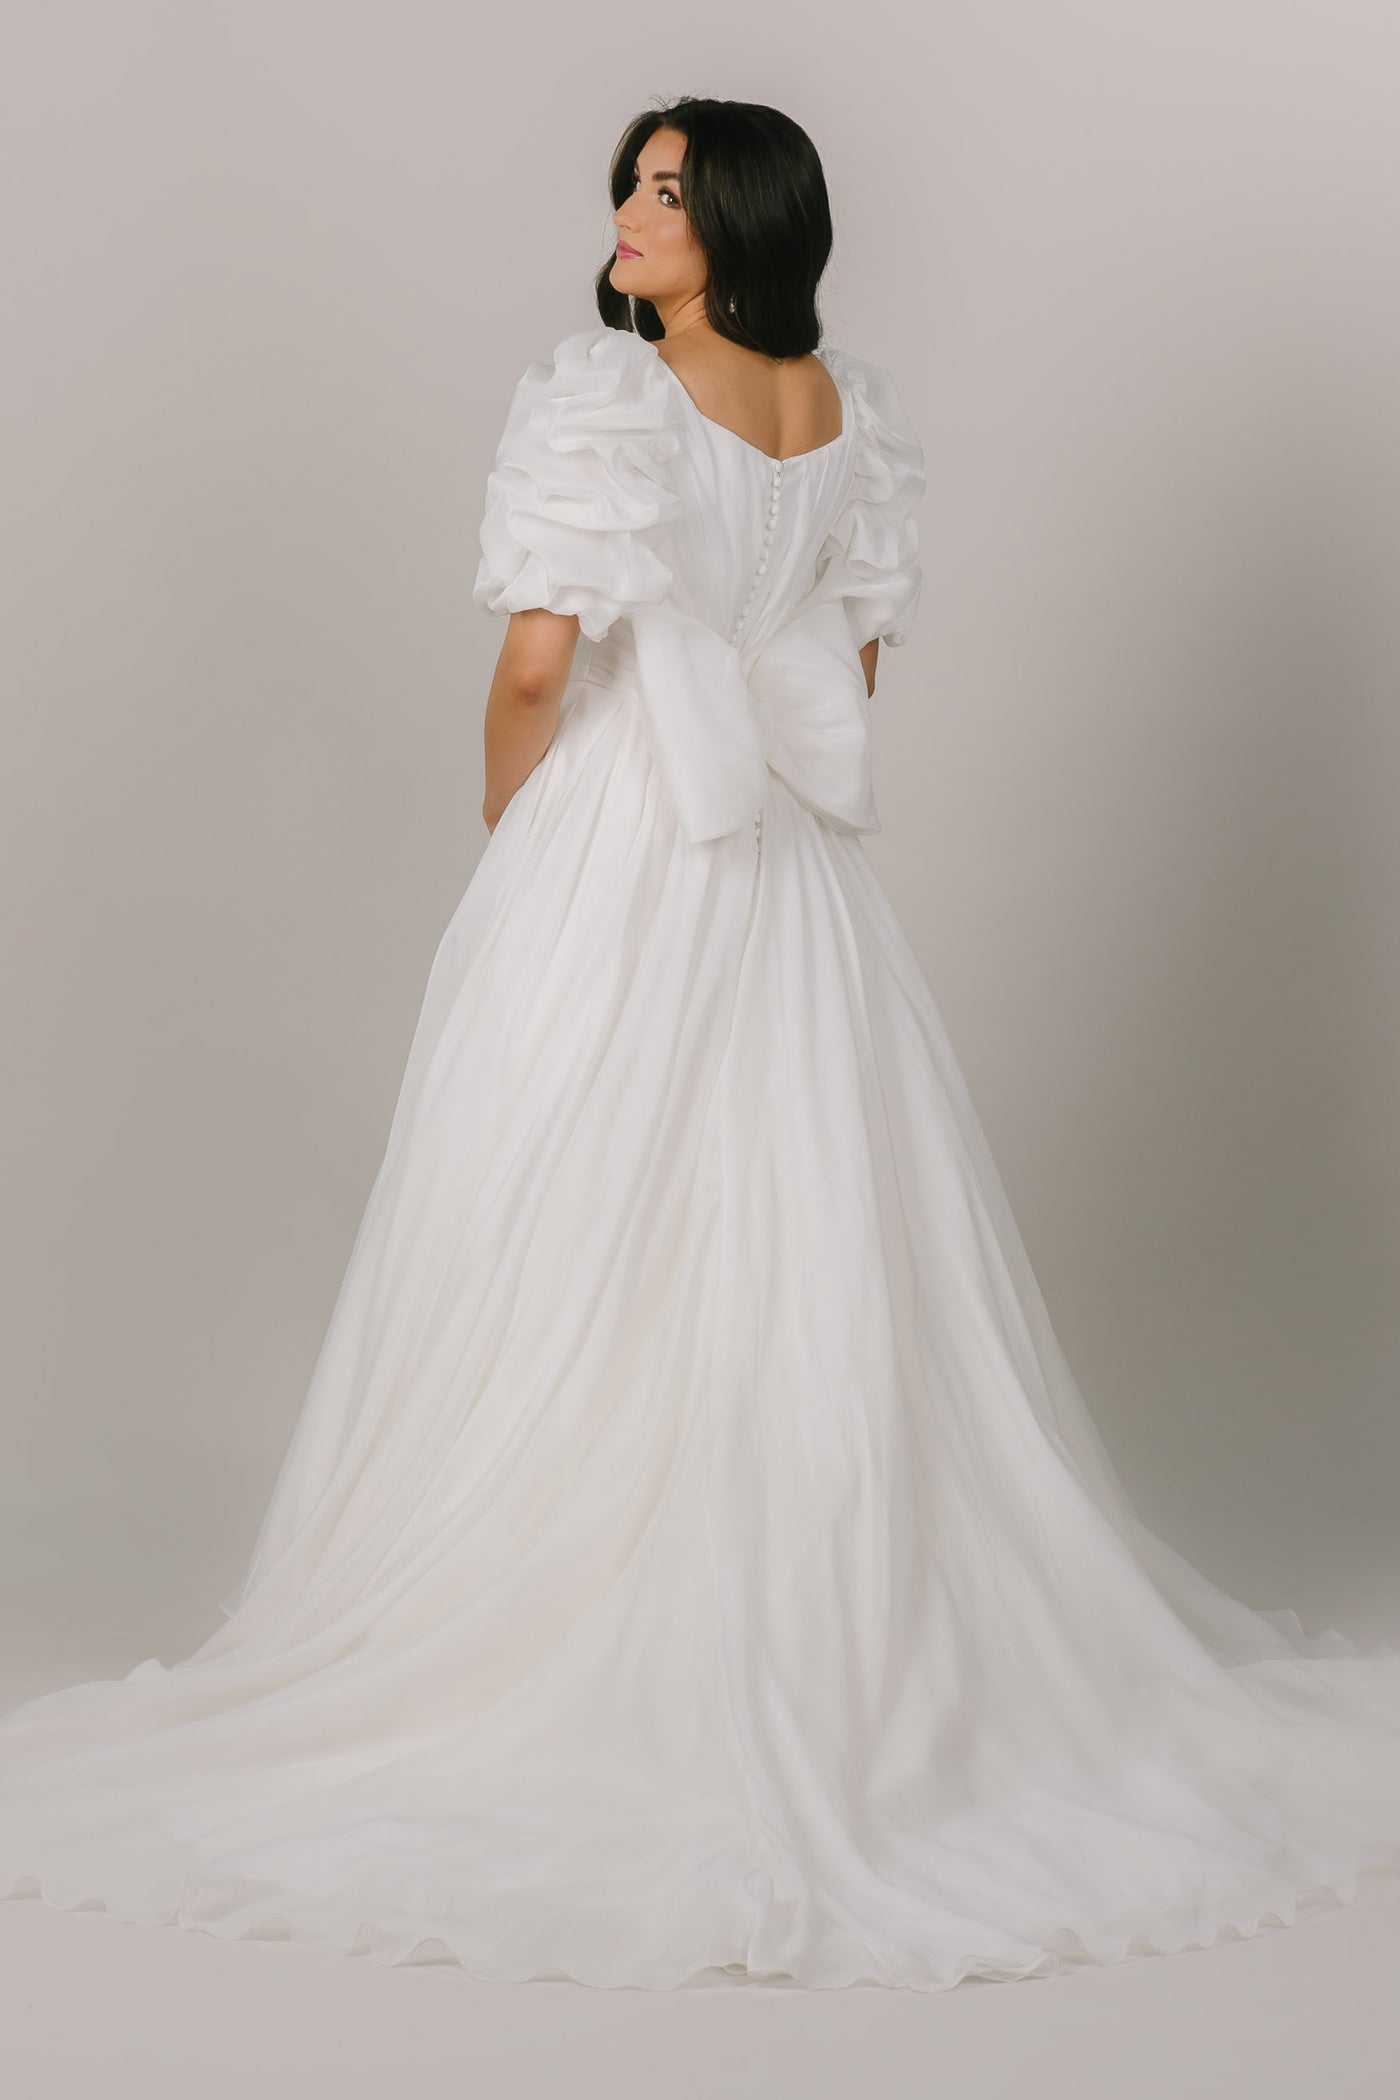 This is a back shot of a modest wedding dress with a large bow on the back and a fun sleeve option.